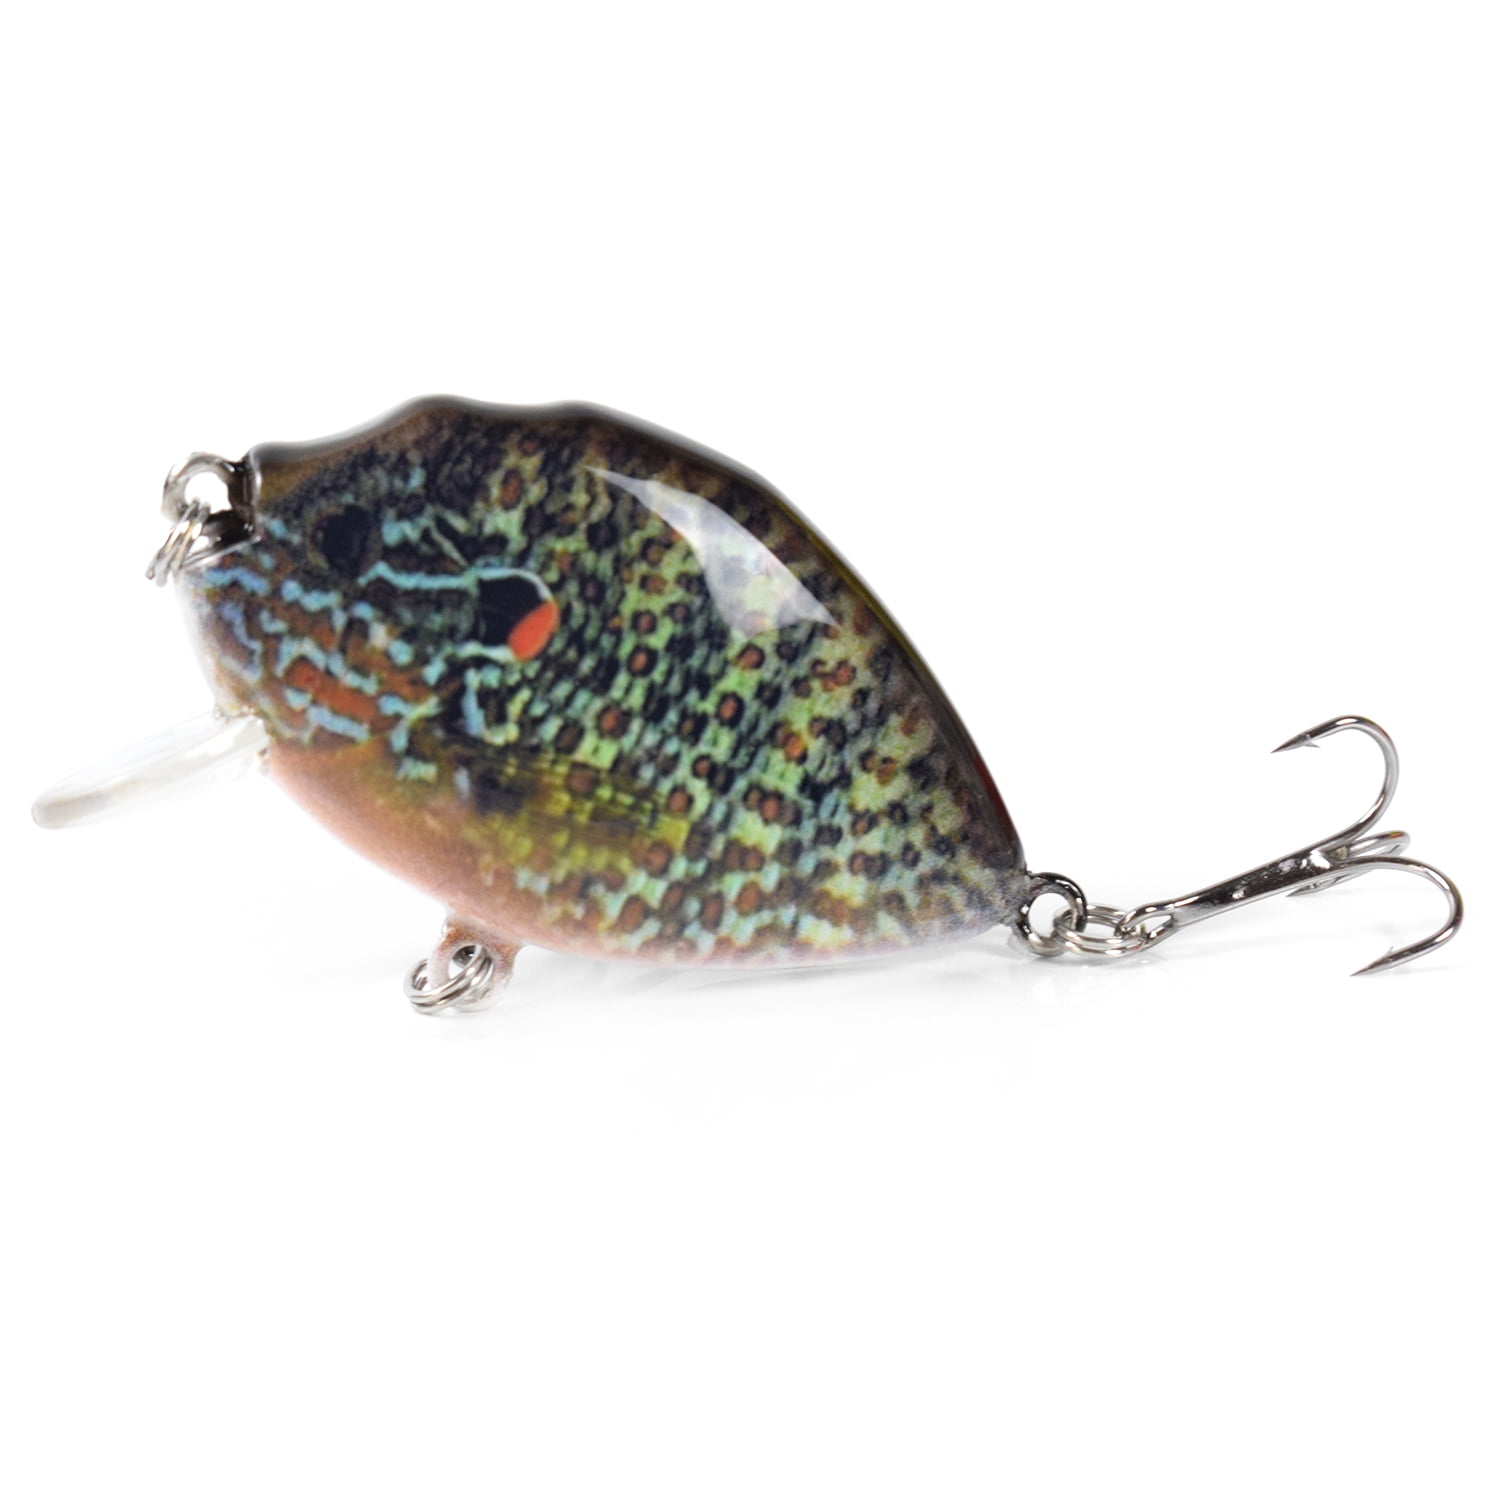 Jointed Shallow Square Bill Jerk baits Lipless Fishing Lures for Bass Sunrise Angler Hard baits Deep Diver Trout Freshwater and Saltwater Crankbaits